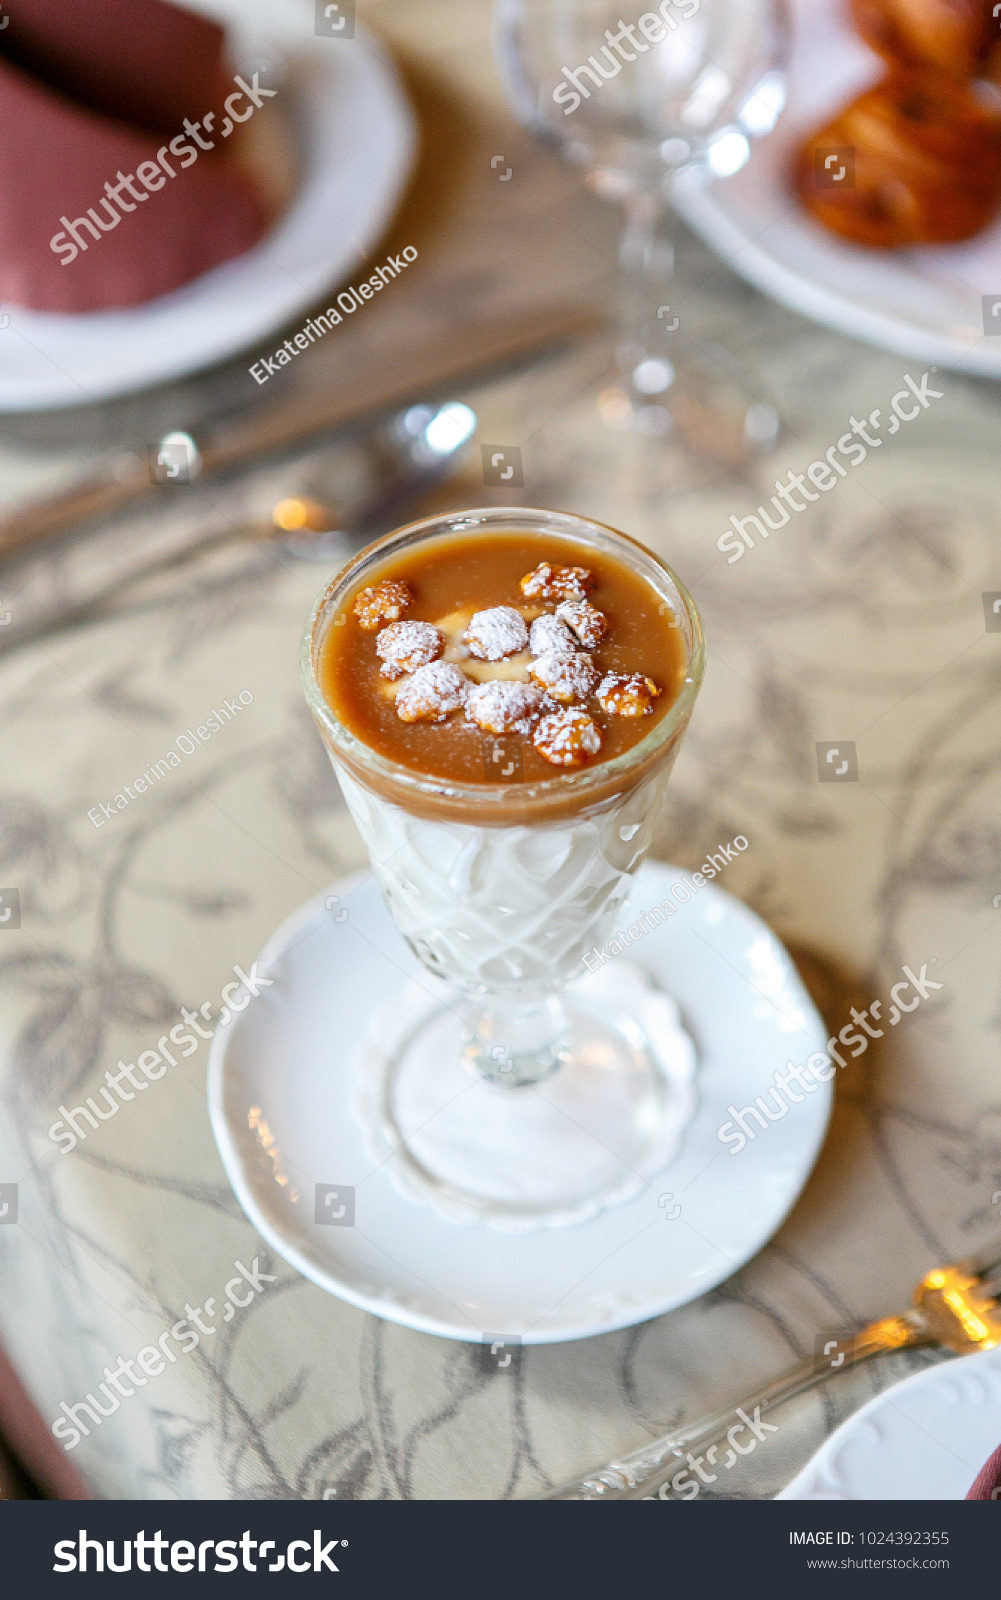 Dessert in a glass on a serving table. Serving dishes in a restaurant, cafe. Beautiful decoration of food. Close up. View from above. Single #1024392355